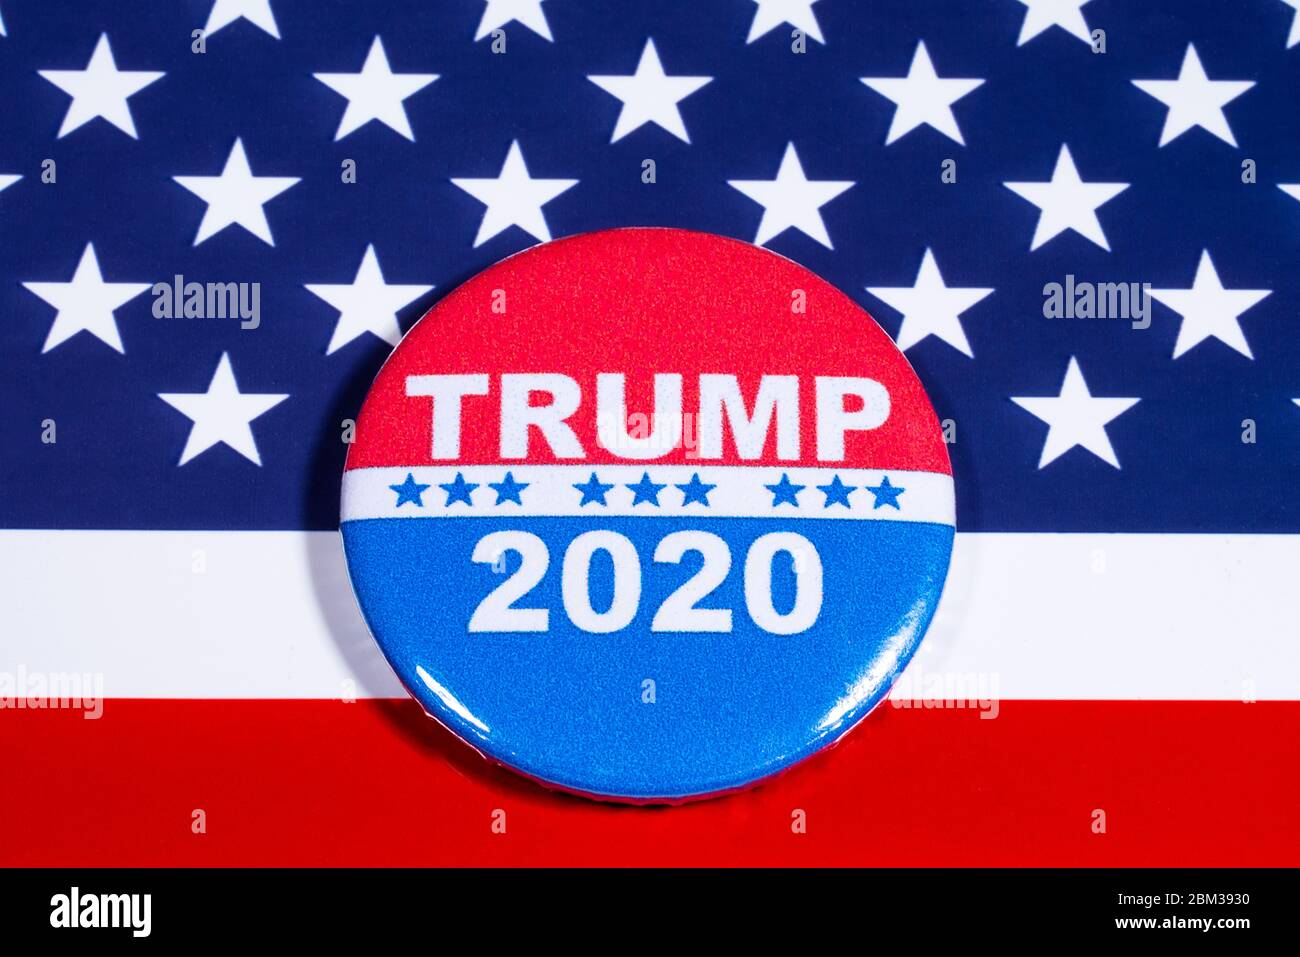 London, UK - May 5th 2020: Donald Trump 2020 badge portraying his campaign to run for a second term as President of the United States of America in 20 Stock Photo